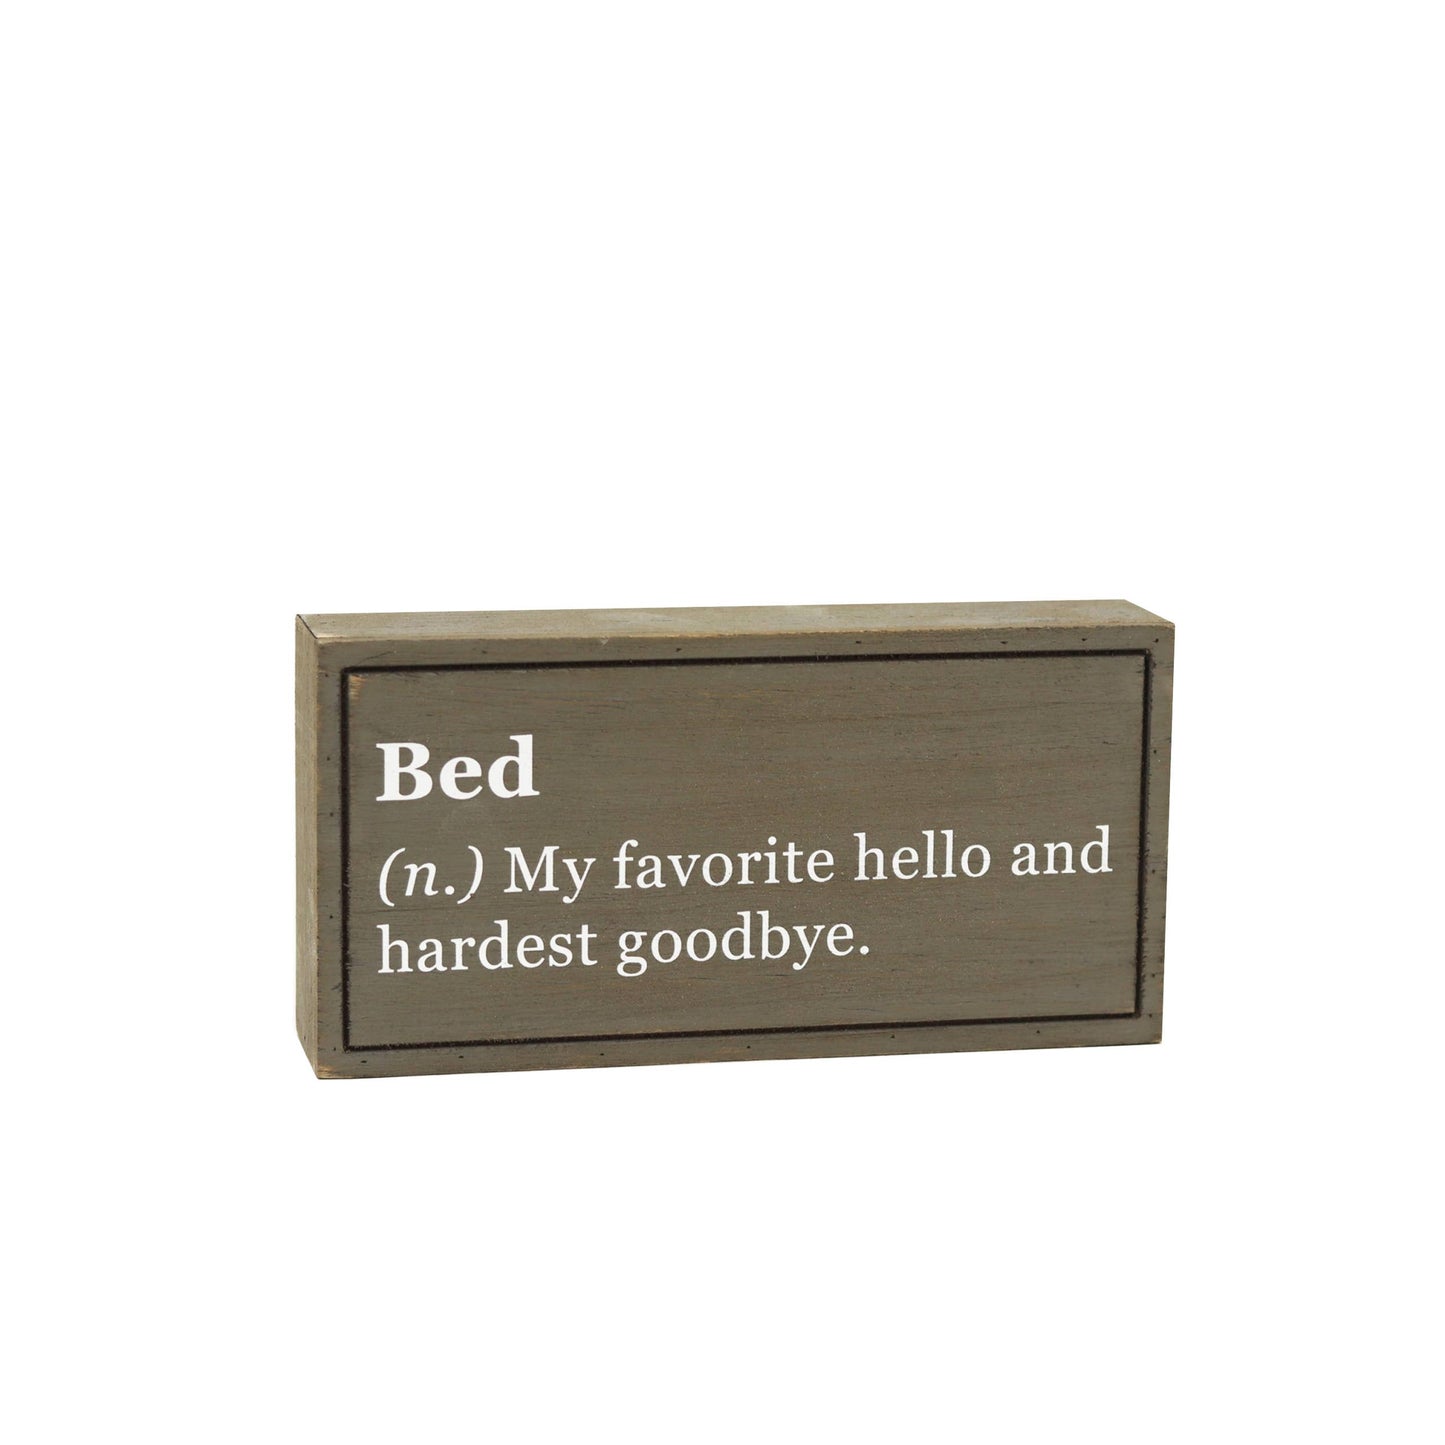 Bed Tabletop Sign, The Feathered Farmhouse